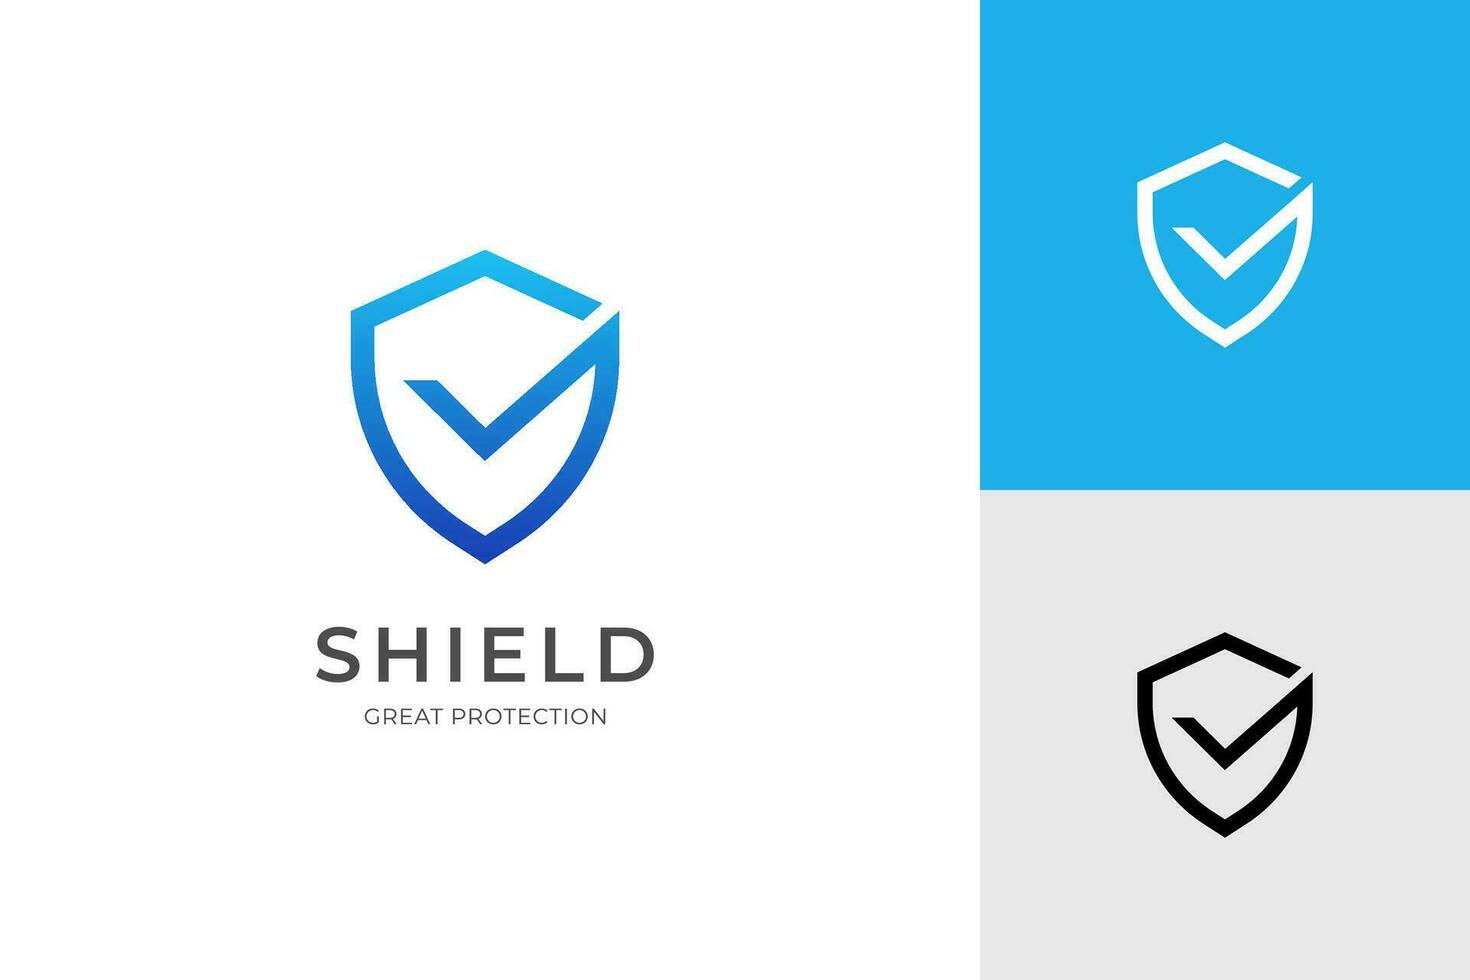 Shield check logo icon design, vector element symbol for right or great protection logo template